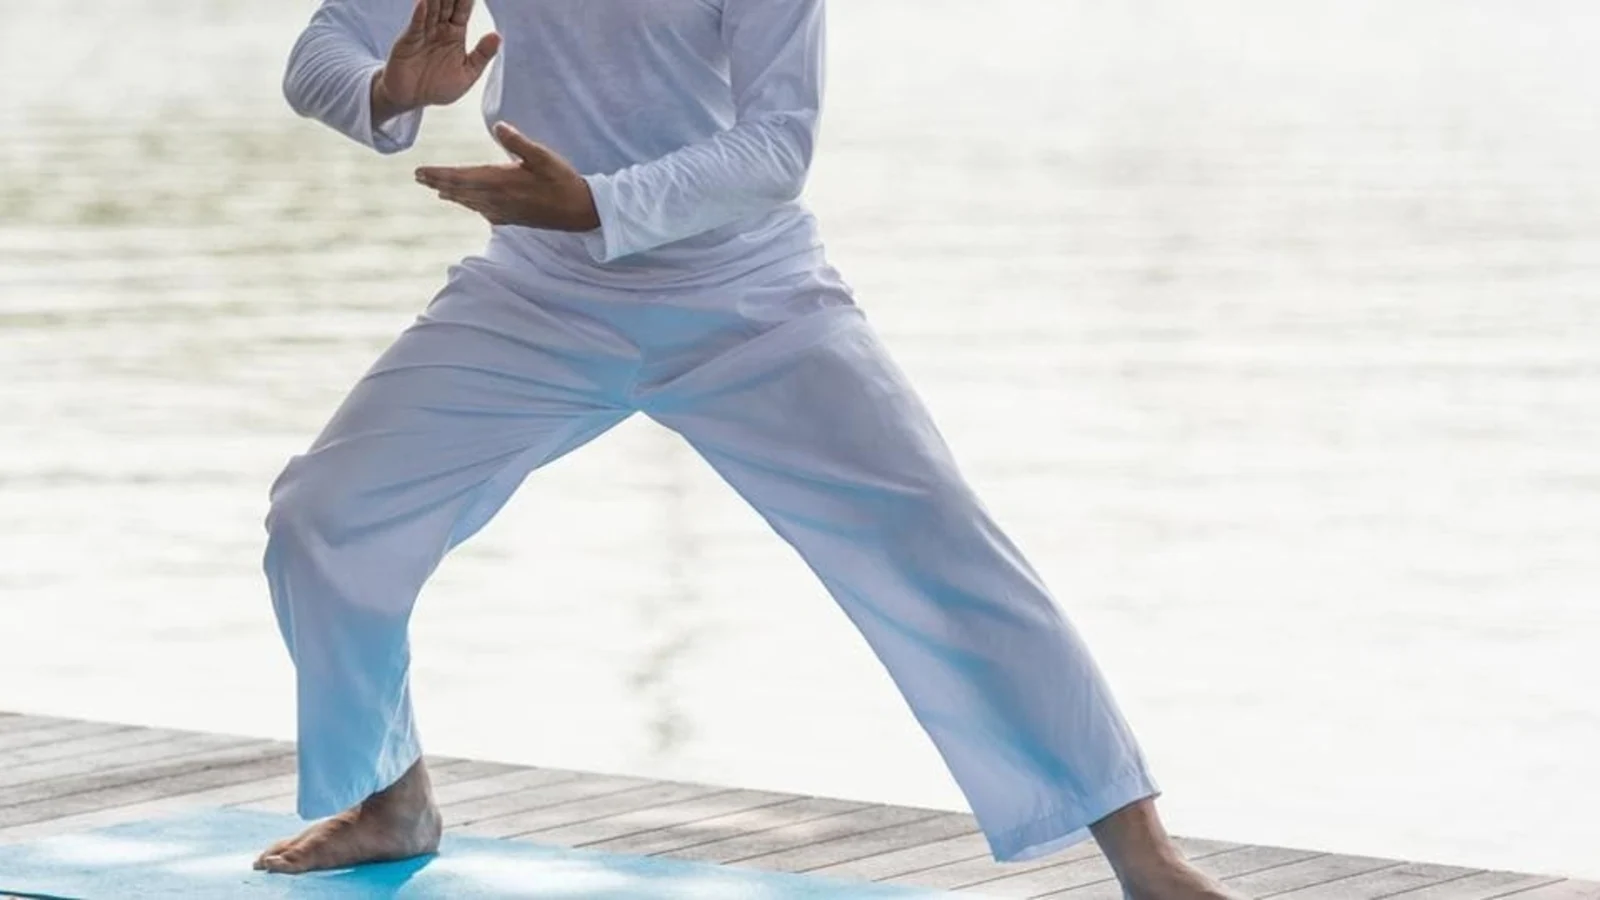 Sitting Tai Chi exercise improves recovery outcomes for older stroke survivors: Study